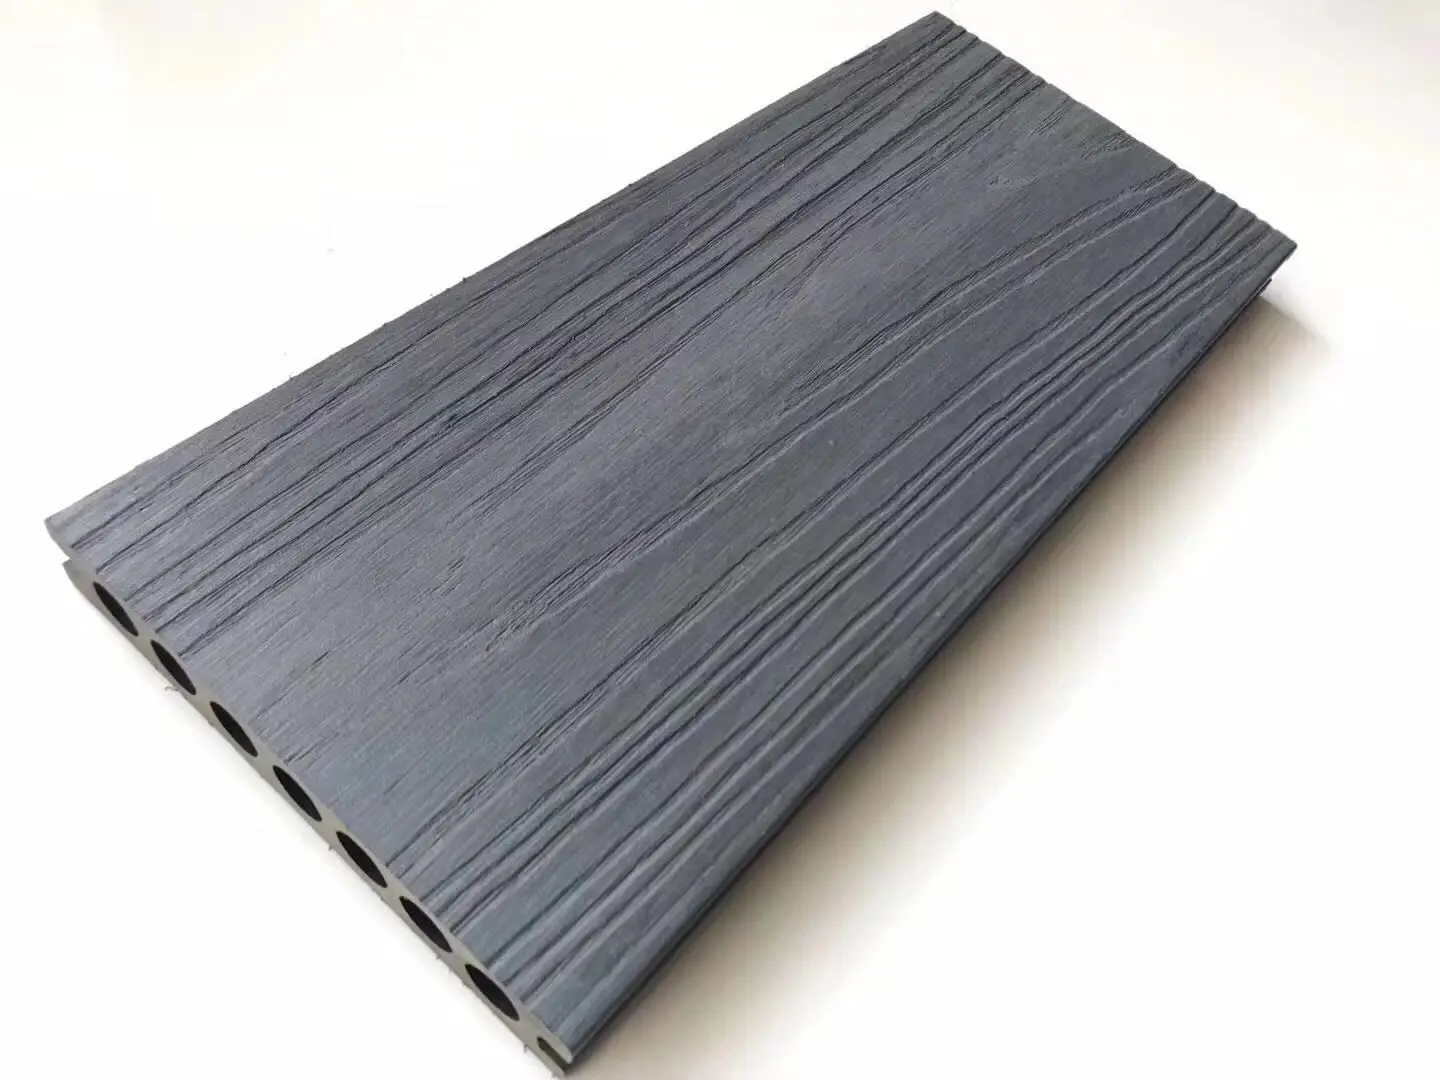 High quality outdoor fireproof anti-slip wpc co-extrusion decking